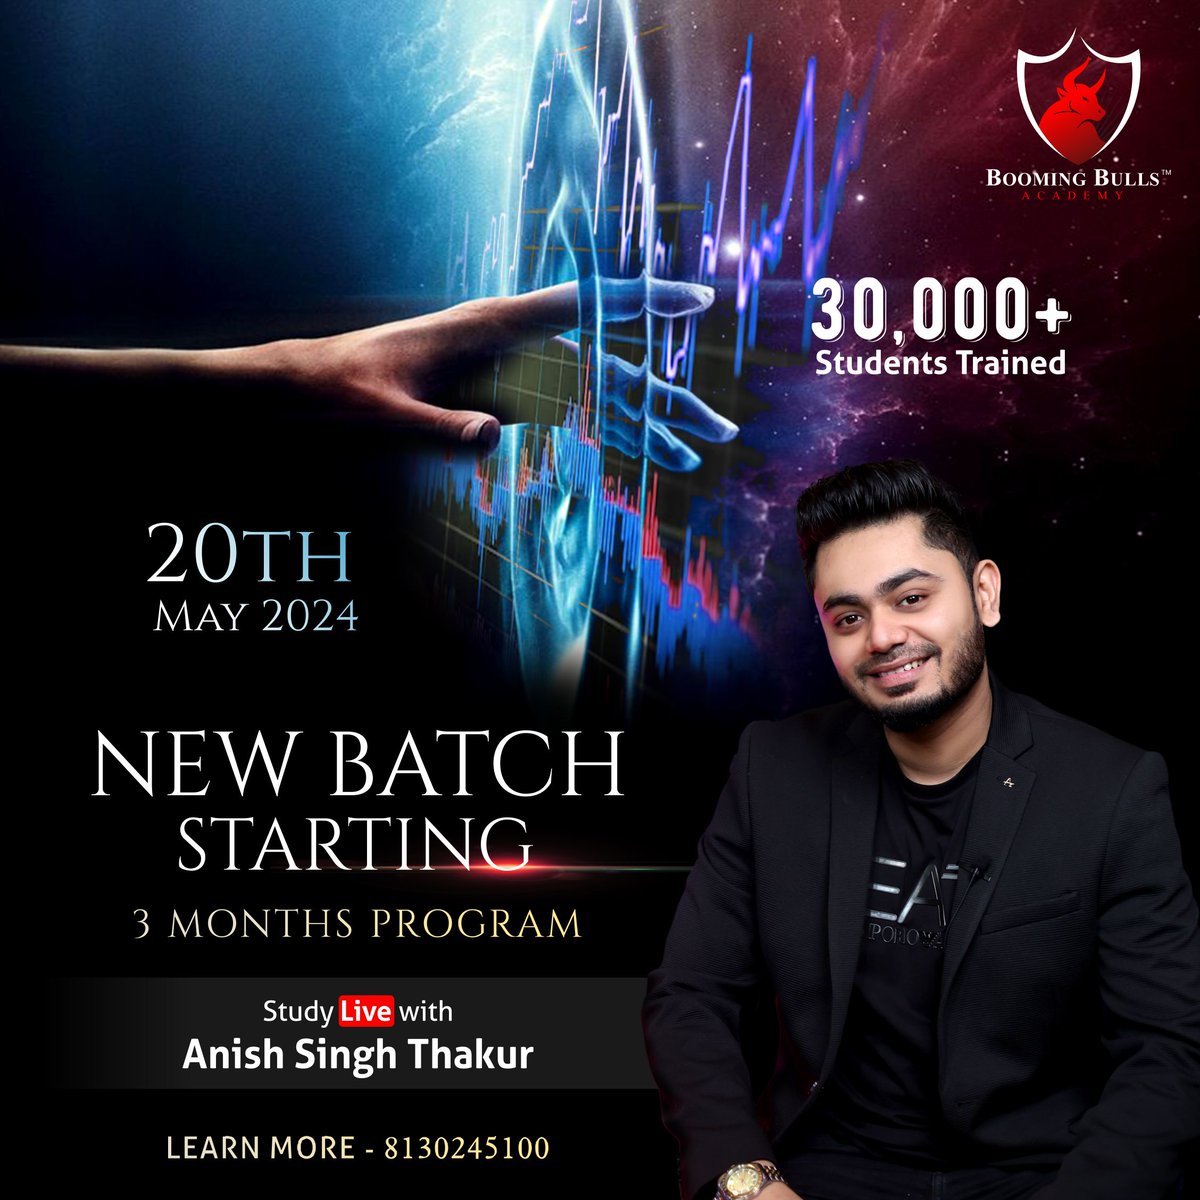 Don't miss out, Simplify your trading journey, learn trading step by step in a structured way! 

Enroll for our Elite Trader live mentorship Program now . 

#batch #financialeducation #stockmarketeducation  #boomingbulls #boomingbullsacademy #anishsinghthakur #forextrading